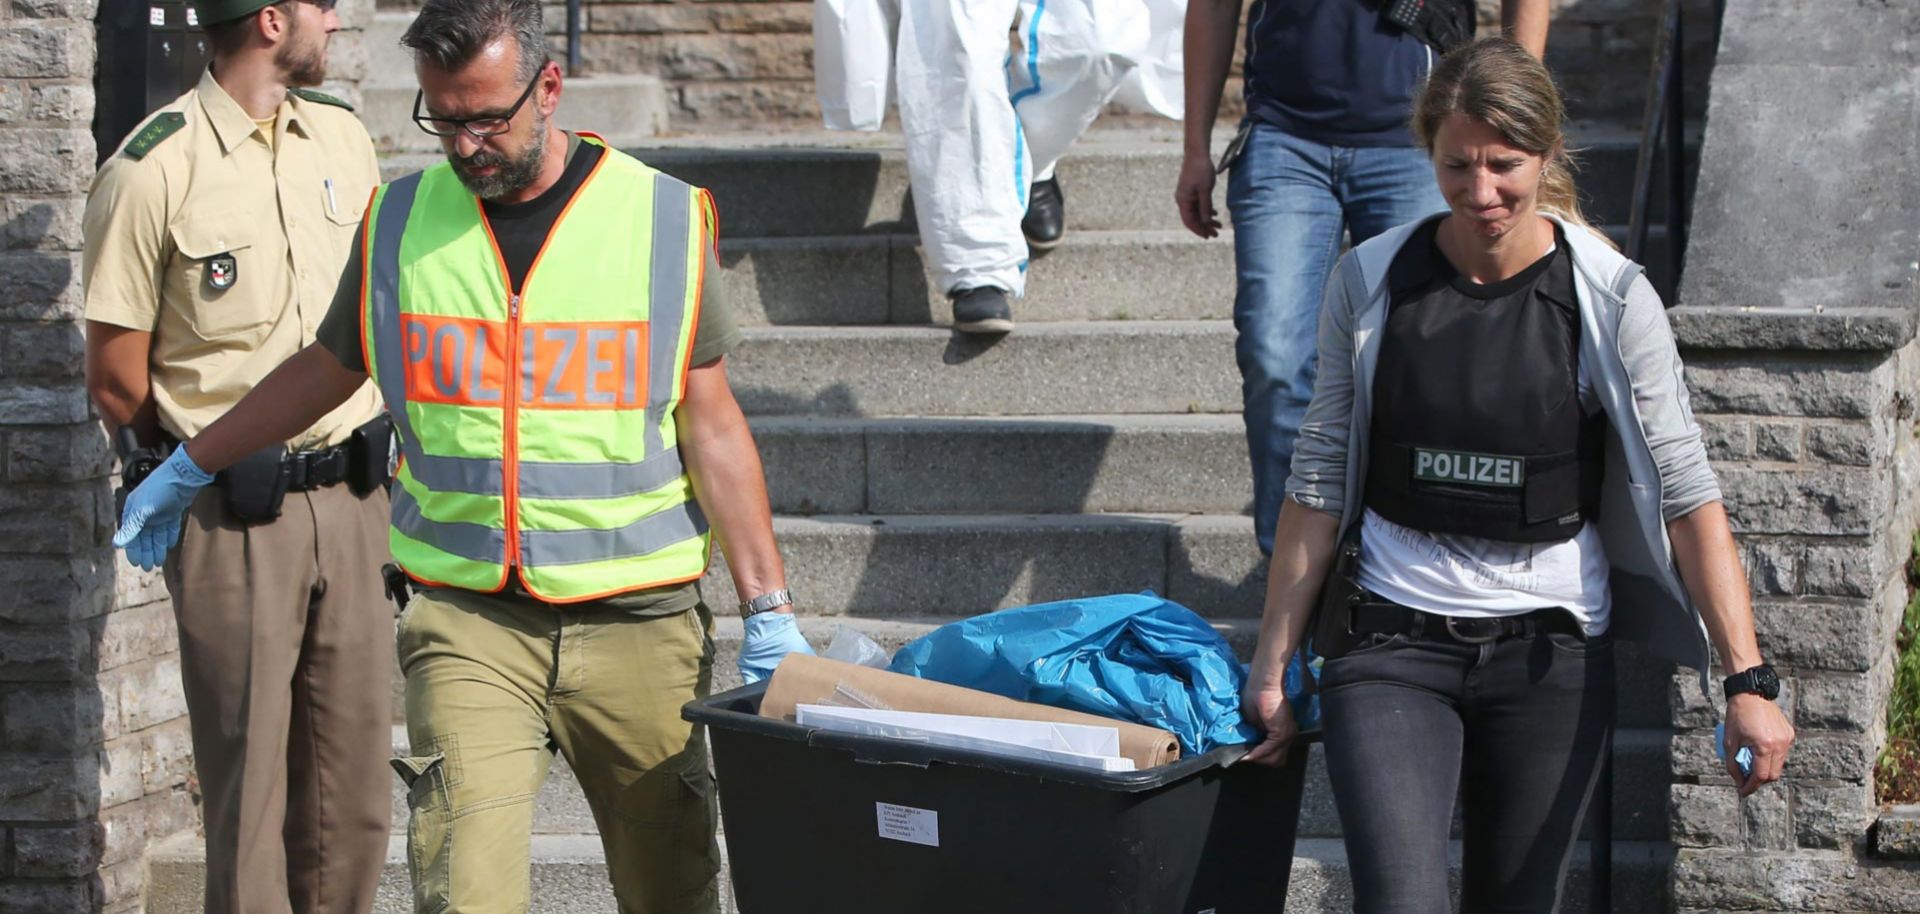 Police officers carry out evidence collected at a refugee center in Ansbach, Germany, where the migrant who was behind the country's first suicide bomb attack lived.